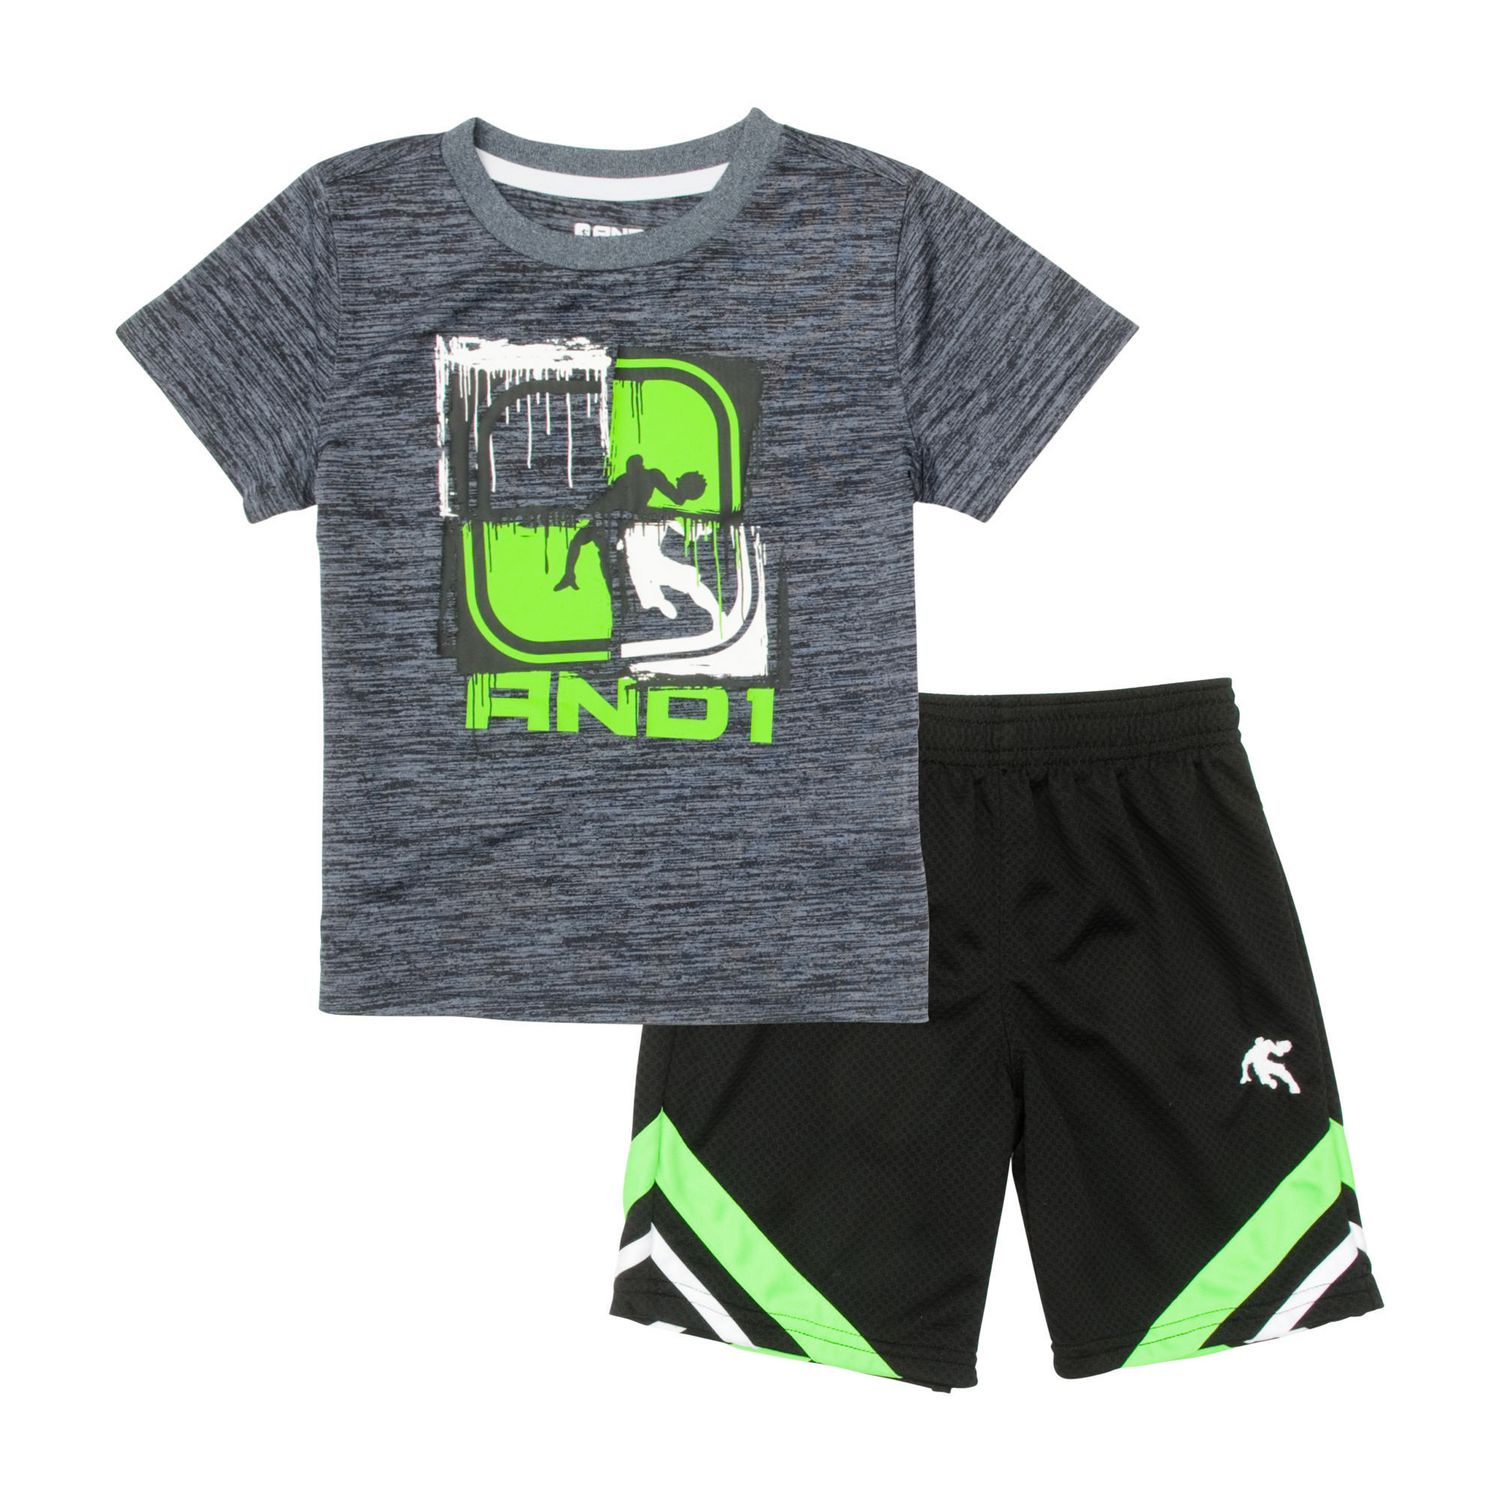 AND1 Infant Boys' Shatter Proof 2 Piece Outfit Set | Walmart Canada